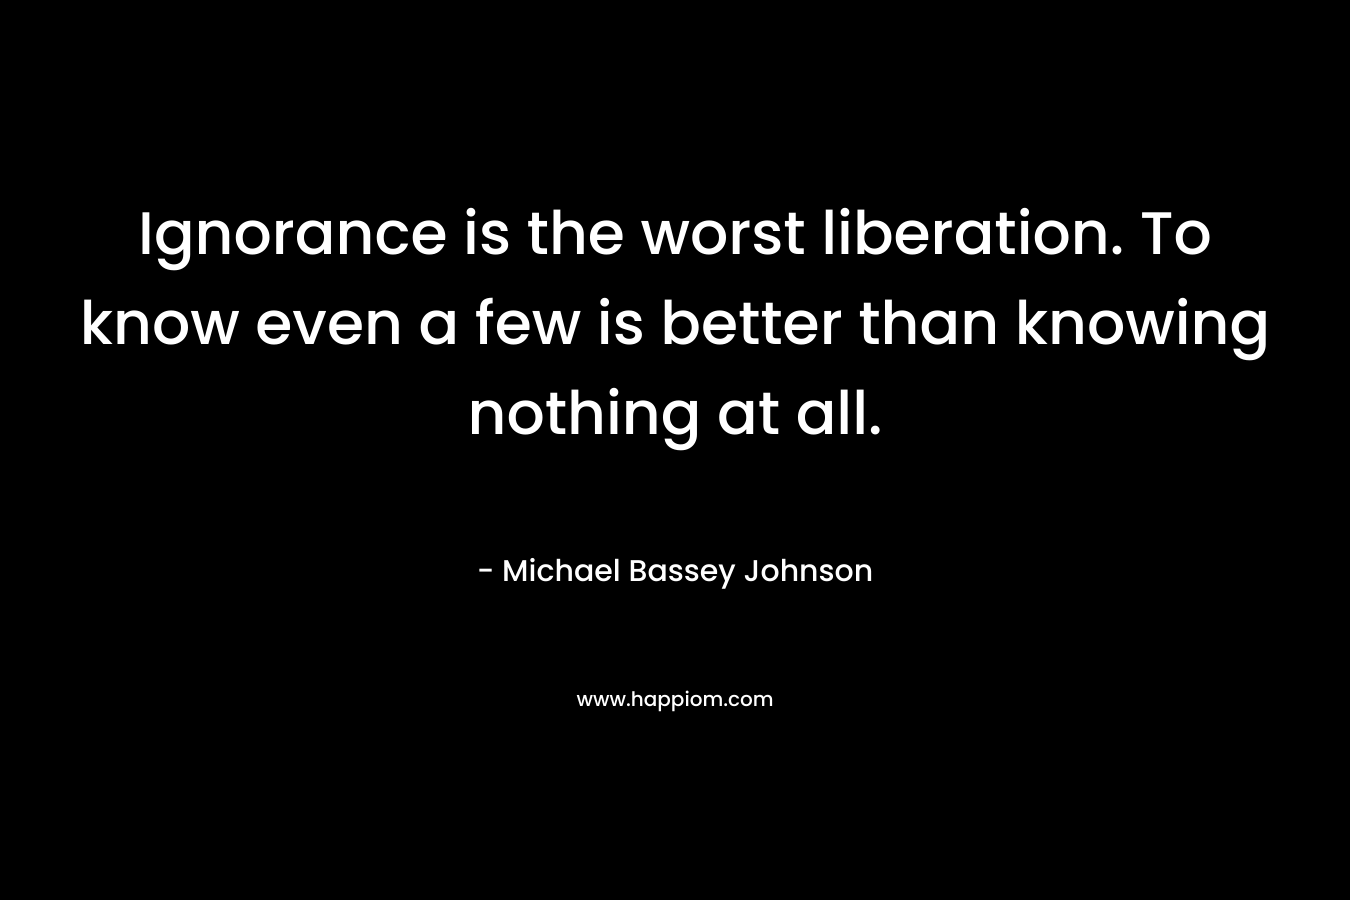 Ignorance is the worst liberation. To know even a few is better than knowing nothing at all. – Michael Bassey Johnson